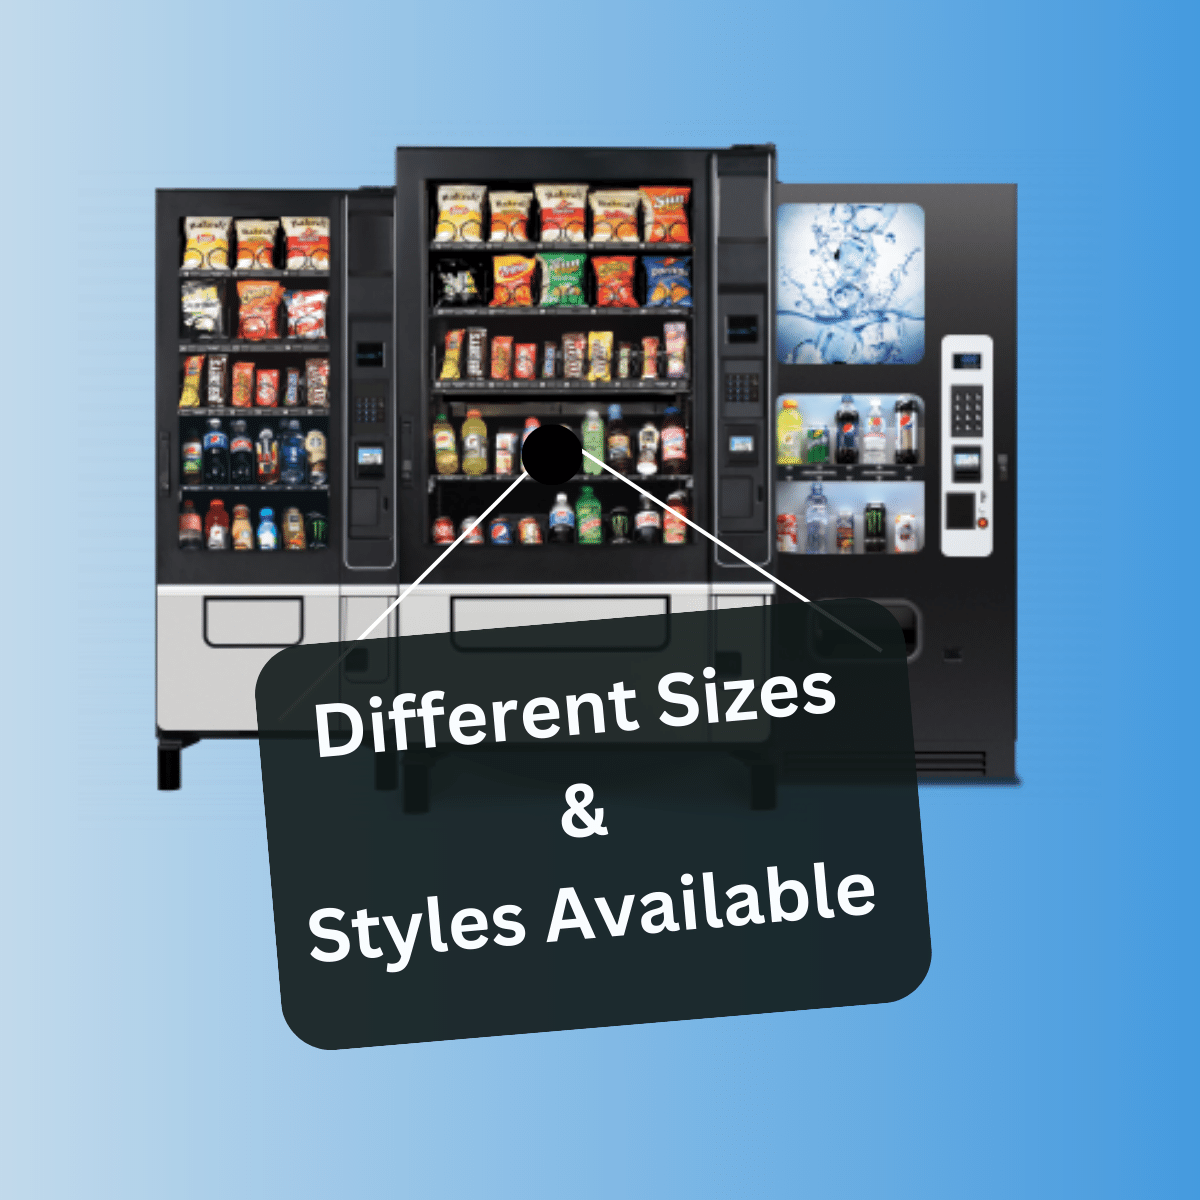 SNACK MACHINES ARE AVAILABLE IN SEVERAL SIZES AND STYLES